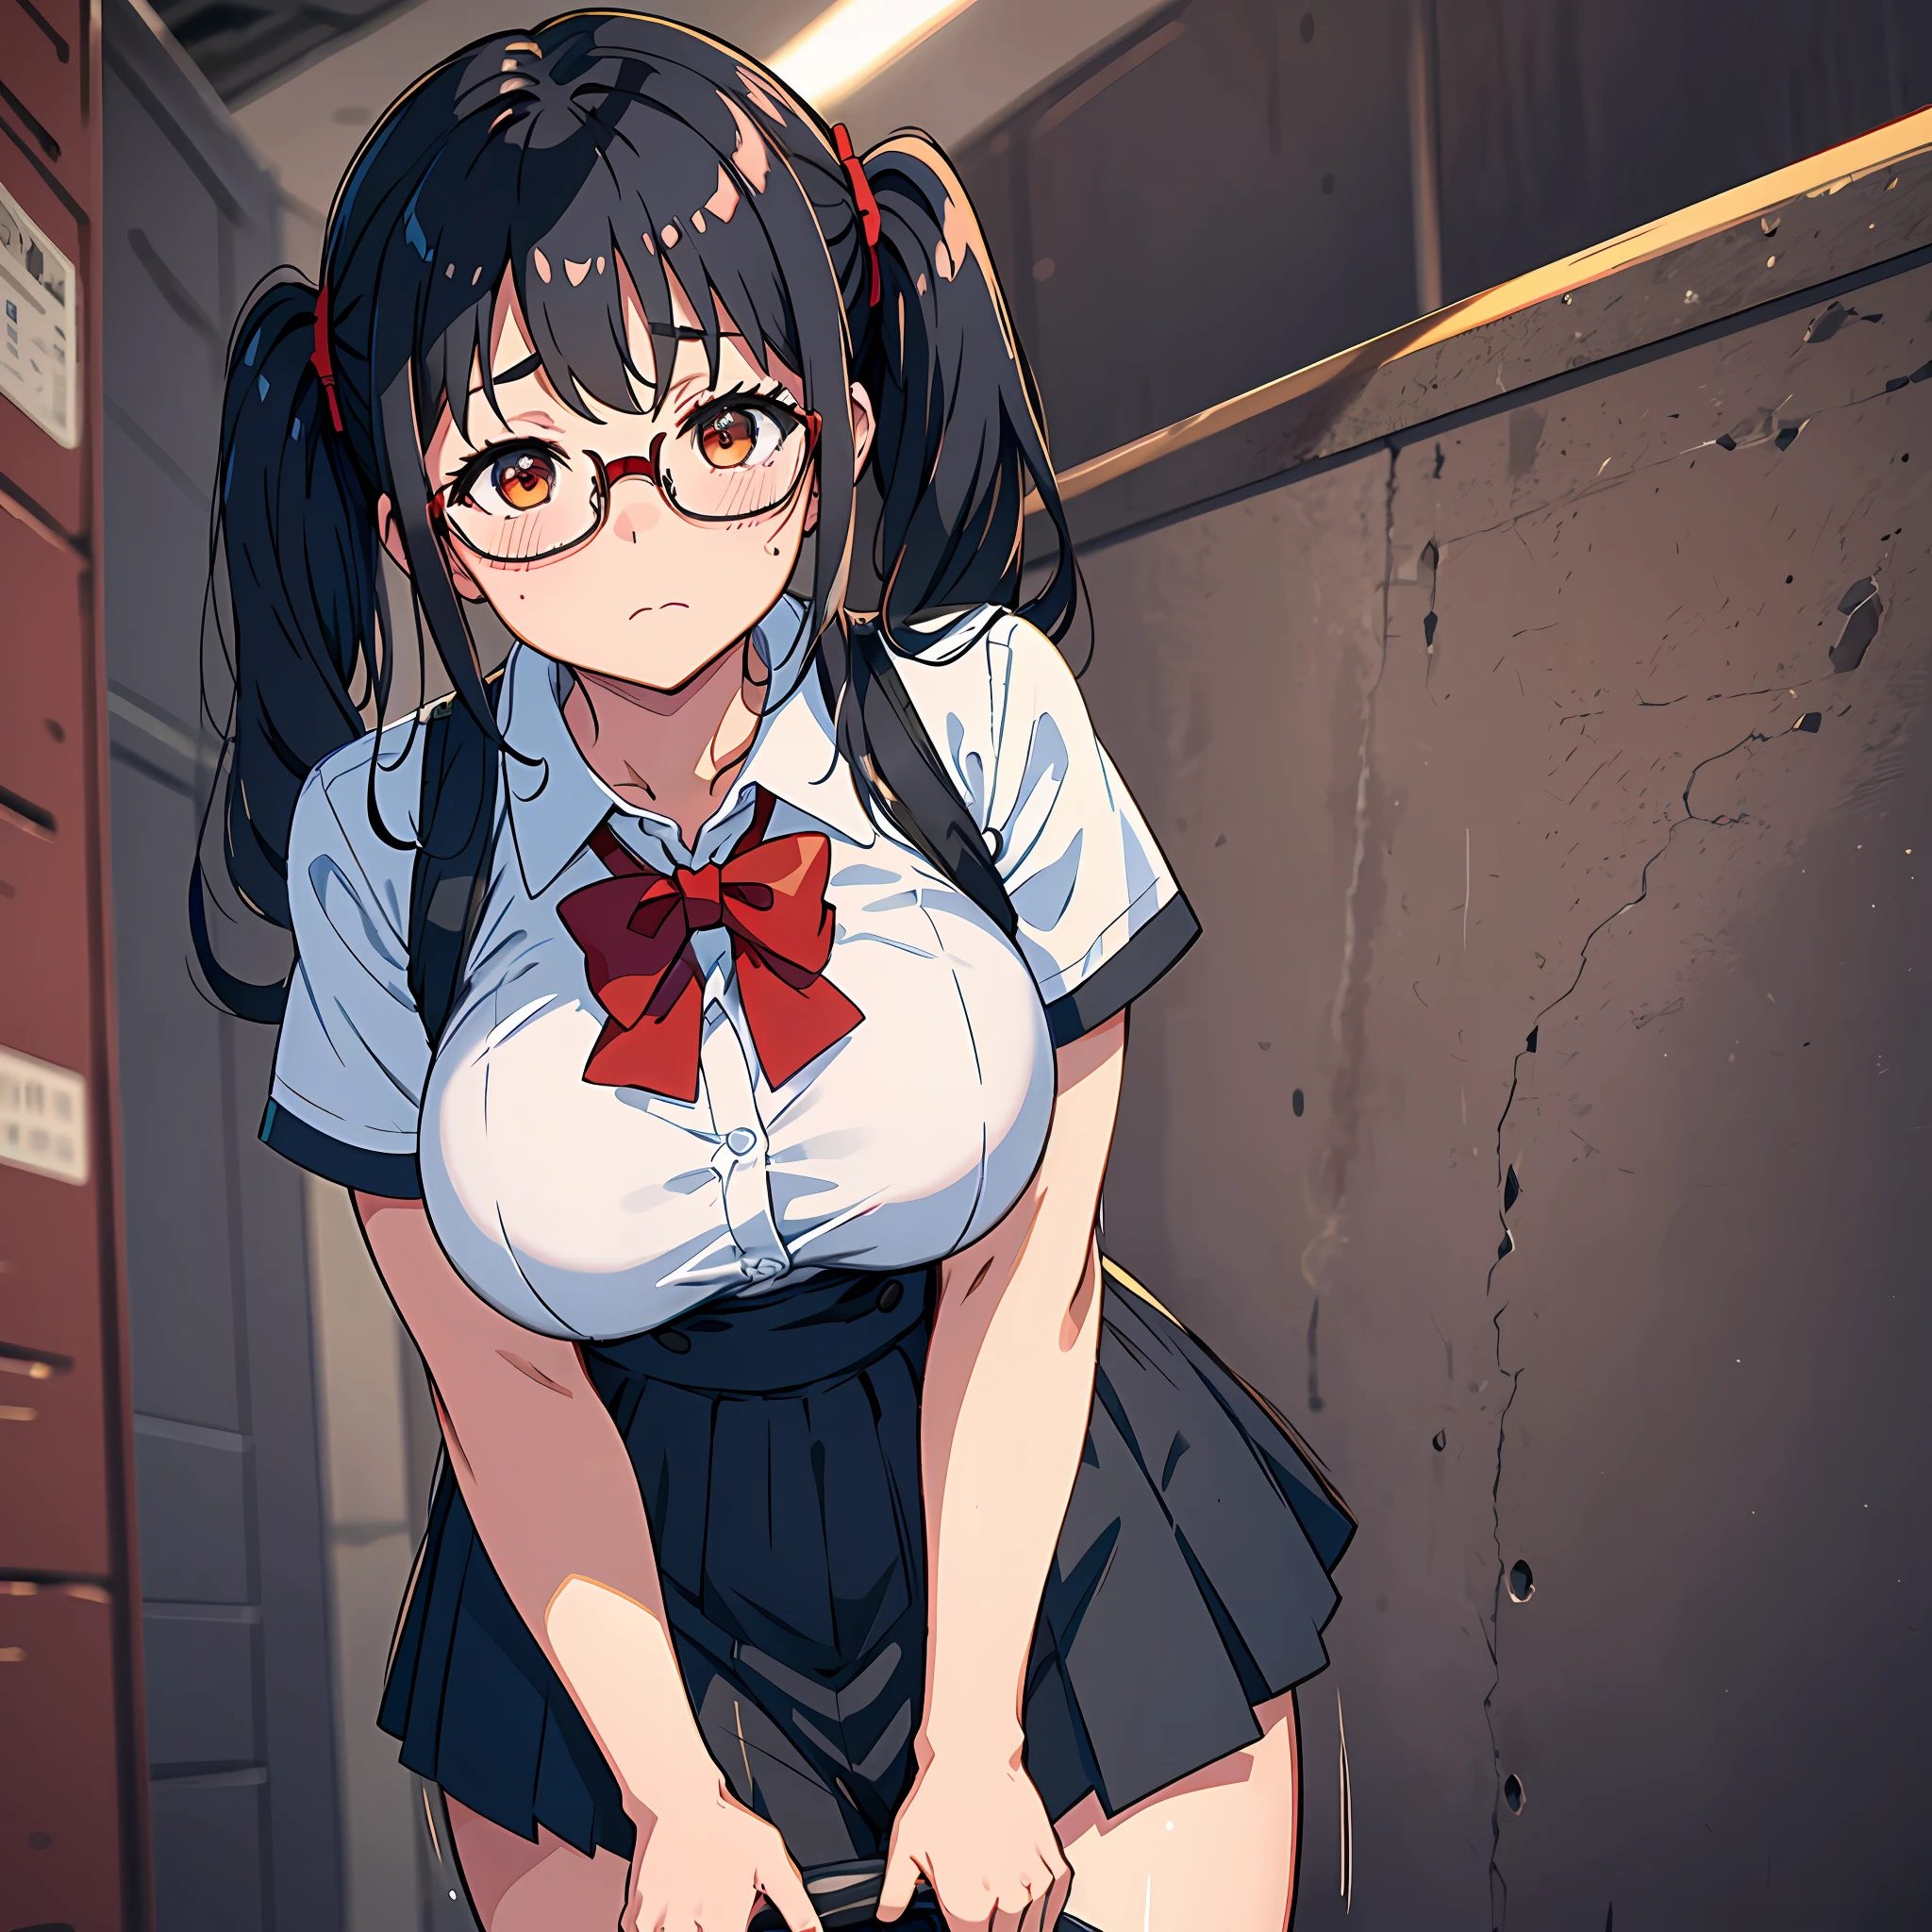 dimly lit warehouse, girl in trouble, 16 years old, , big breasts, black hair pigtails, snappy, black hair, brooding, glasses, holding crotch with both hands, chubby,, red cheeks